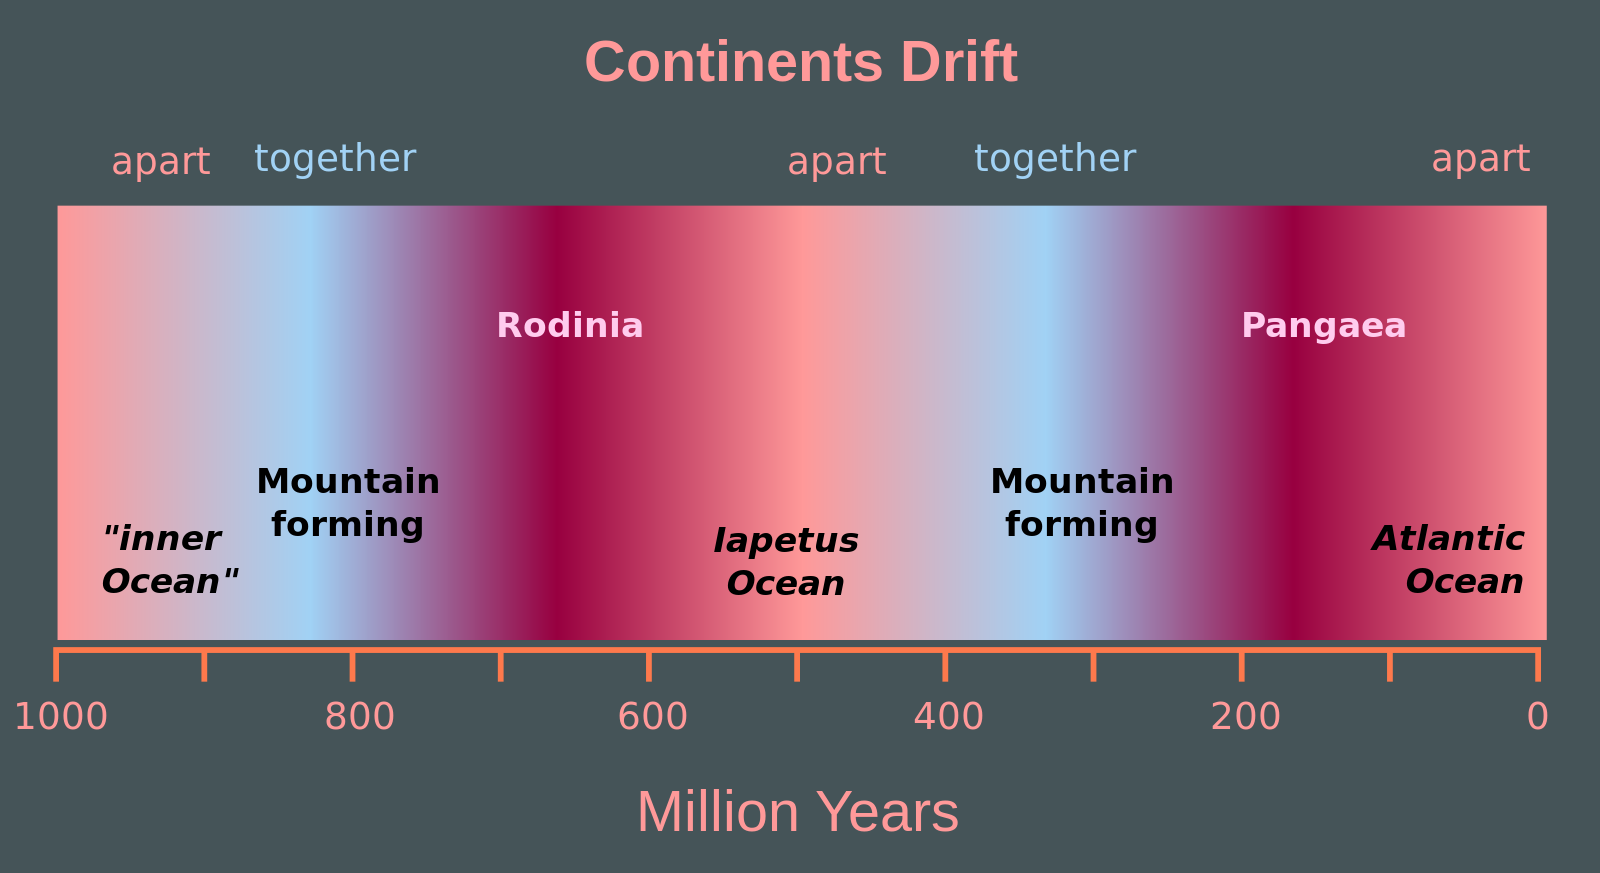 Rectangular diagram with a scale bar along the bottom labeled "million years." On the left end of the scale is the number 1,000 and on the right end is the number 0 (present day). Starting at the left-hand side, the following labels are on the diagram: "inner ocean" around 950 million years, "mountain forming" around 800 million years, "Rodinia" around 660 million years, "Iapetus Ocean" around 500 million years, "Mountain forming" around 300 million years, "Pangaea" around 180 million years, and "Atlantic Ocean" around 50 million years.